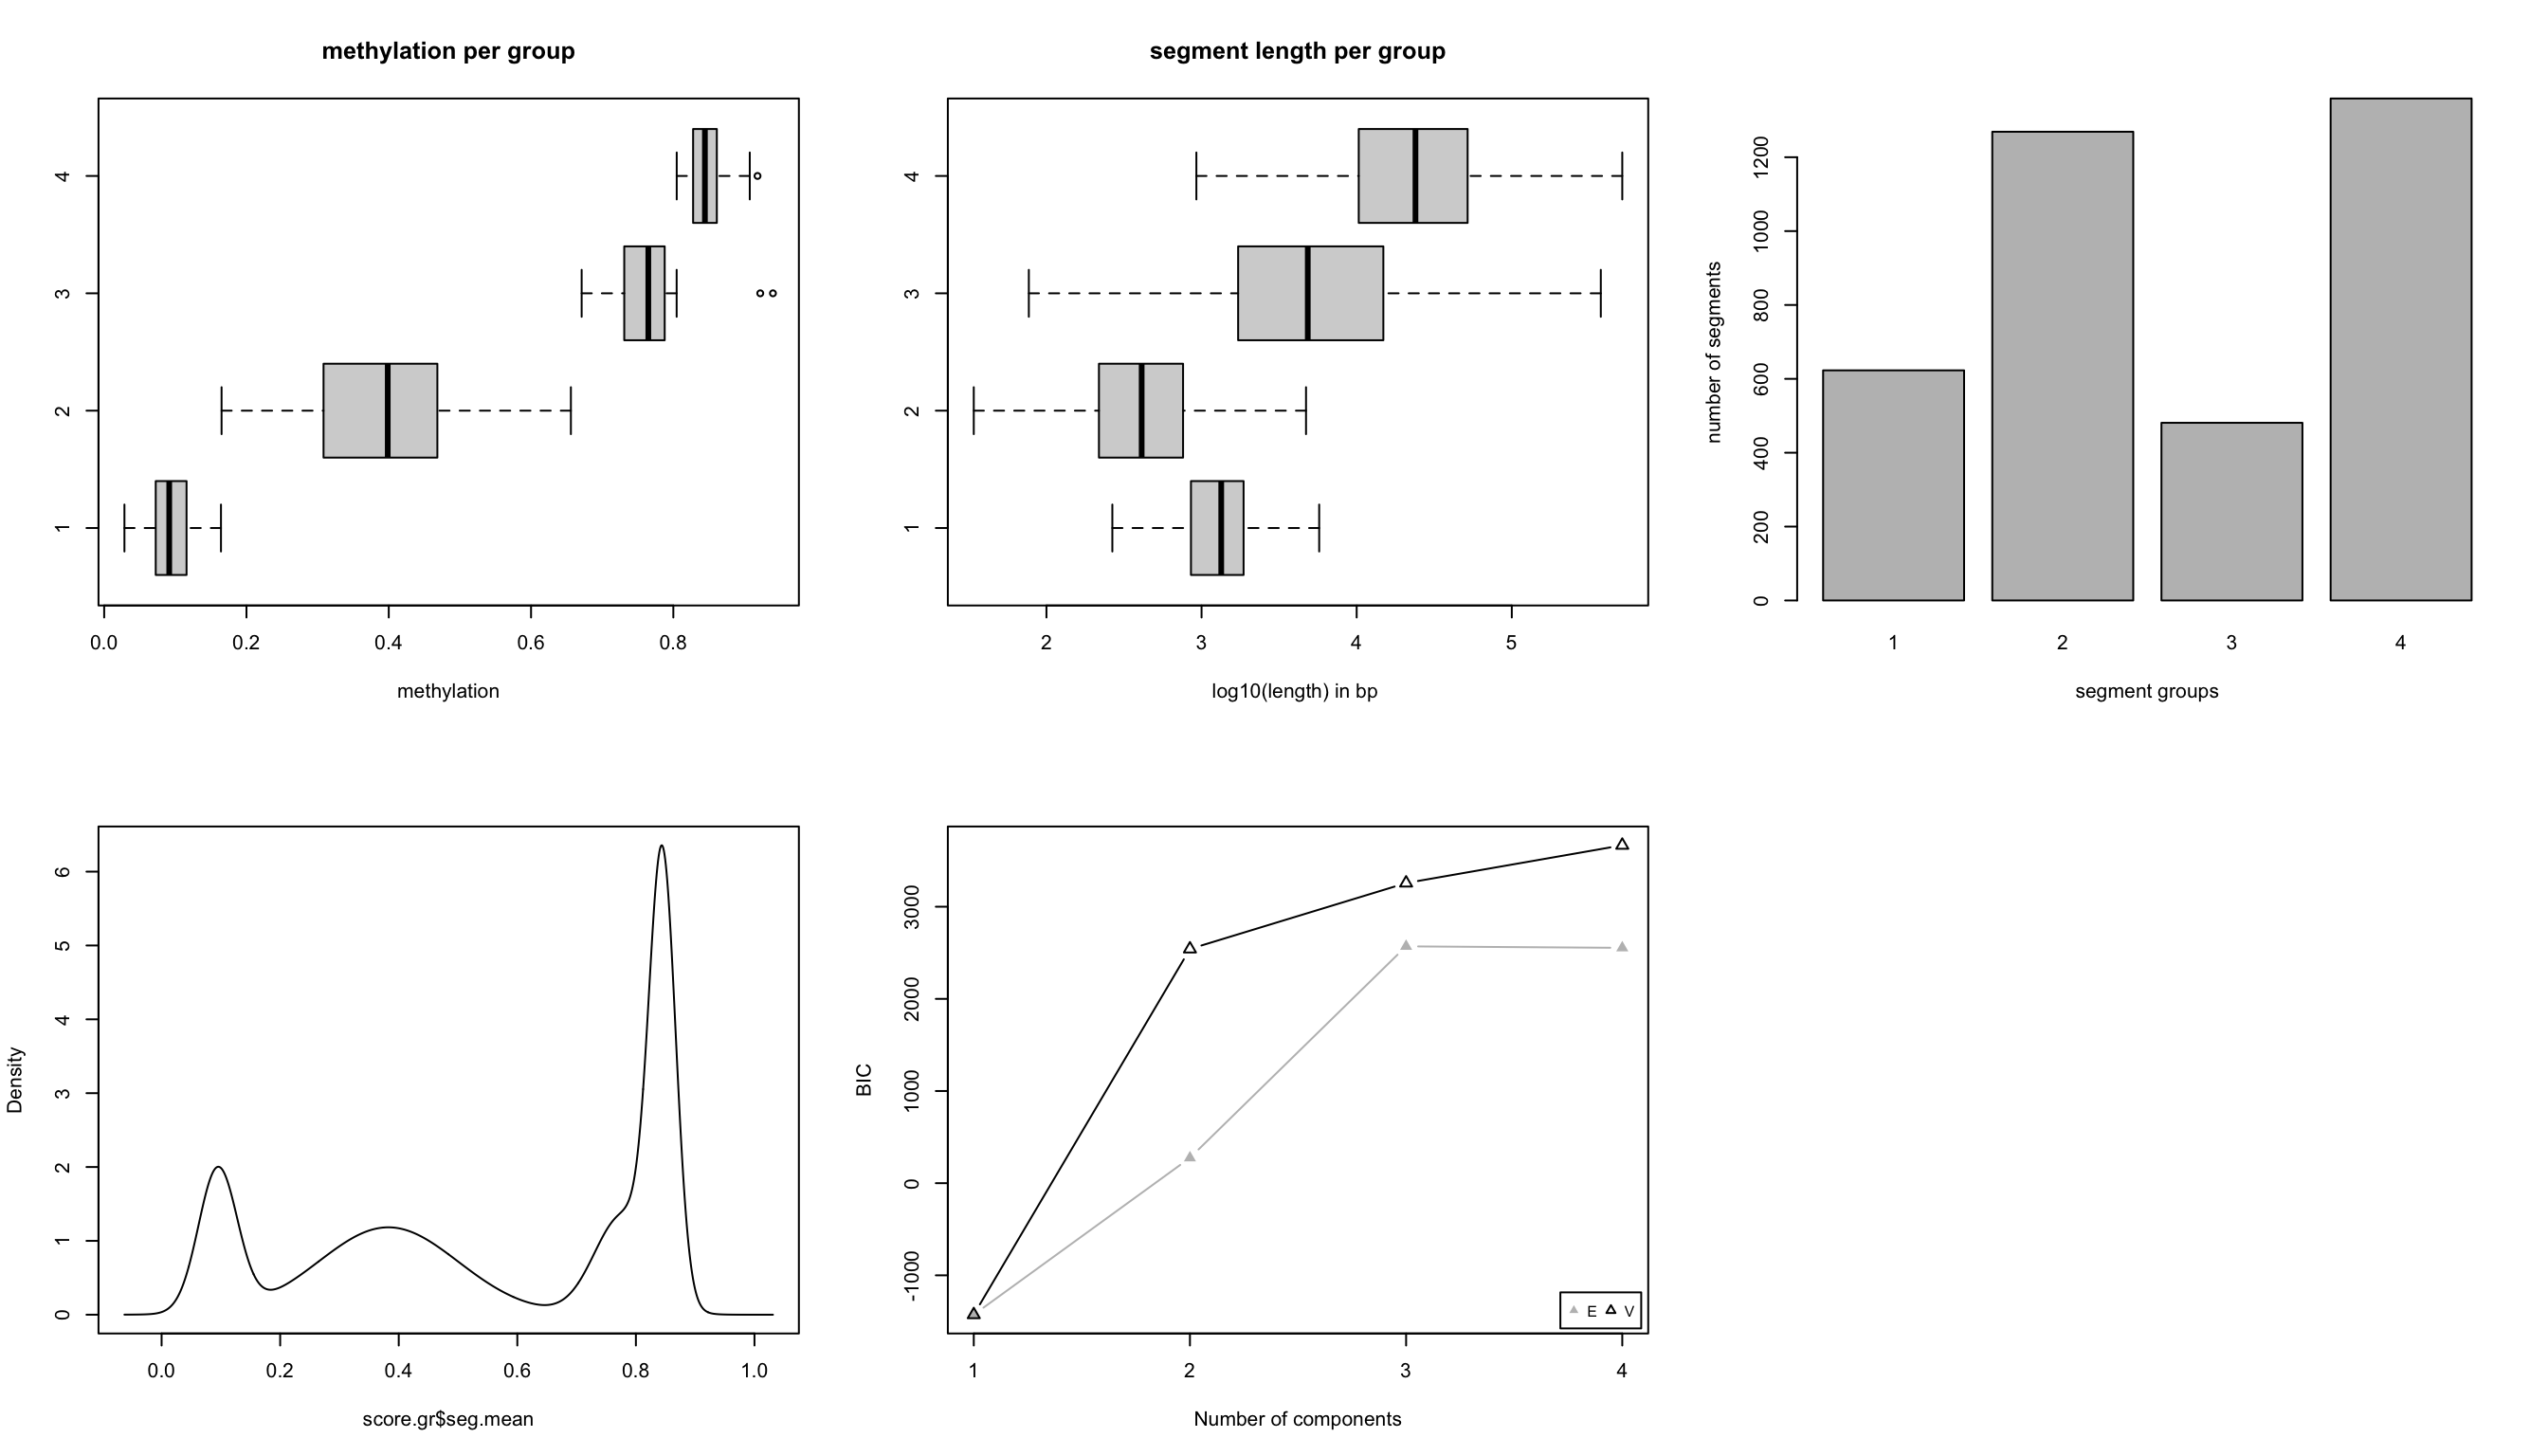 Segmentation characteristics shown in different plots. Top left: Mean methylation values per segment in each segment class. Top middle: Length of each segment as boxplots for each segment class. Top right: Number of segments in each segment class. Bottom left: Distribution of segment methylation values. Bottom right: BIC for different number of segment classes